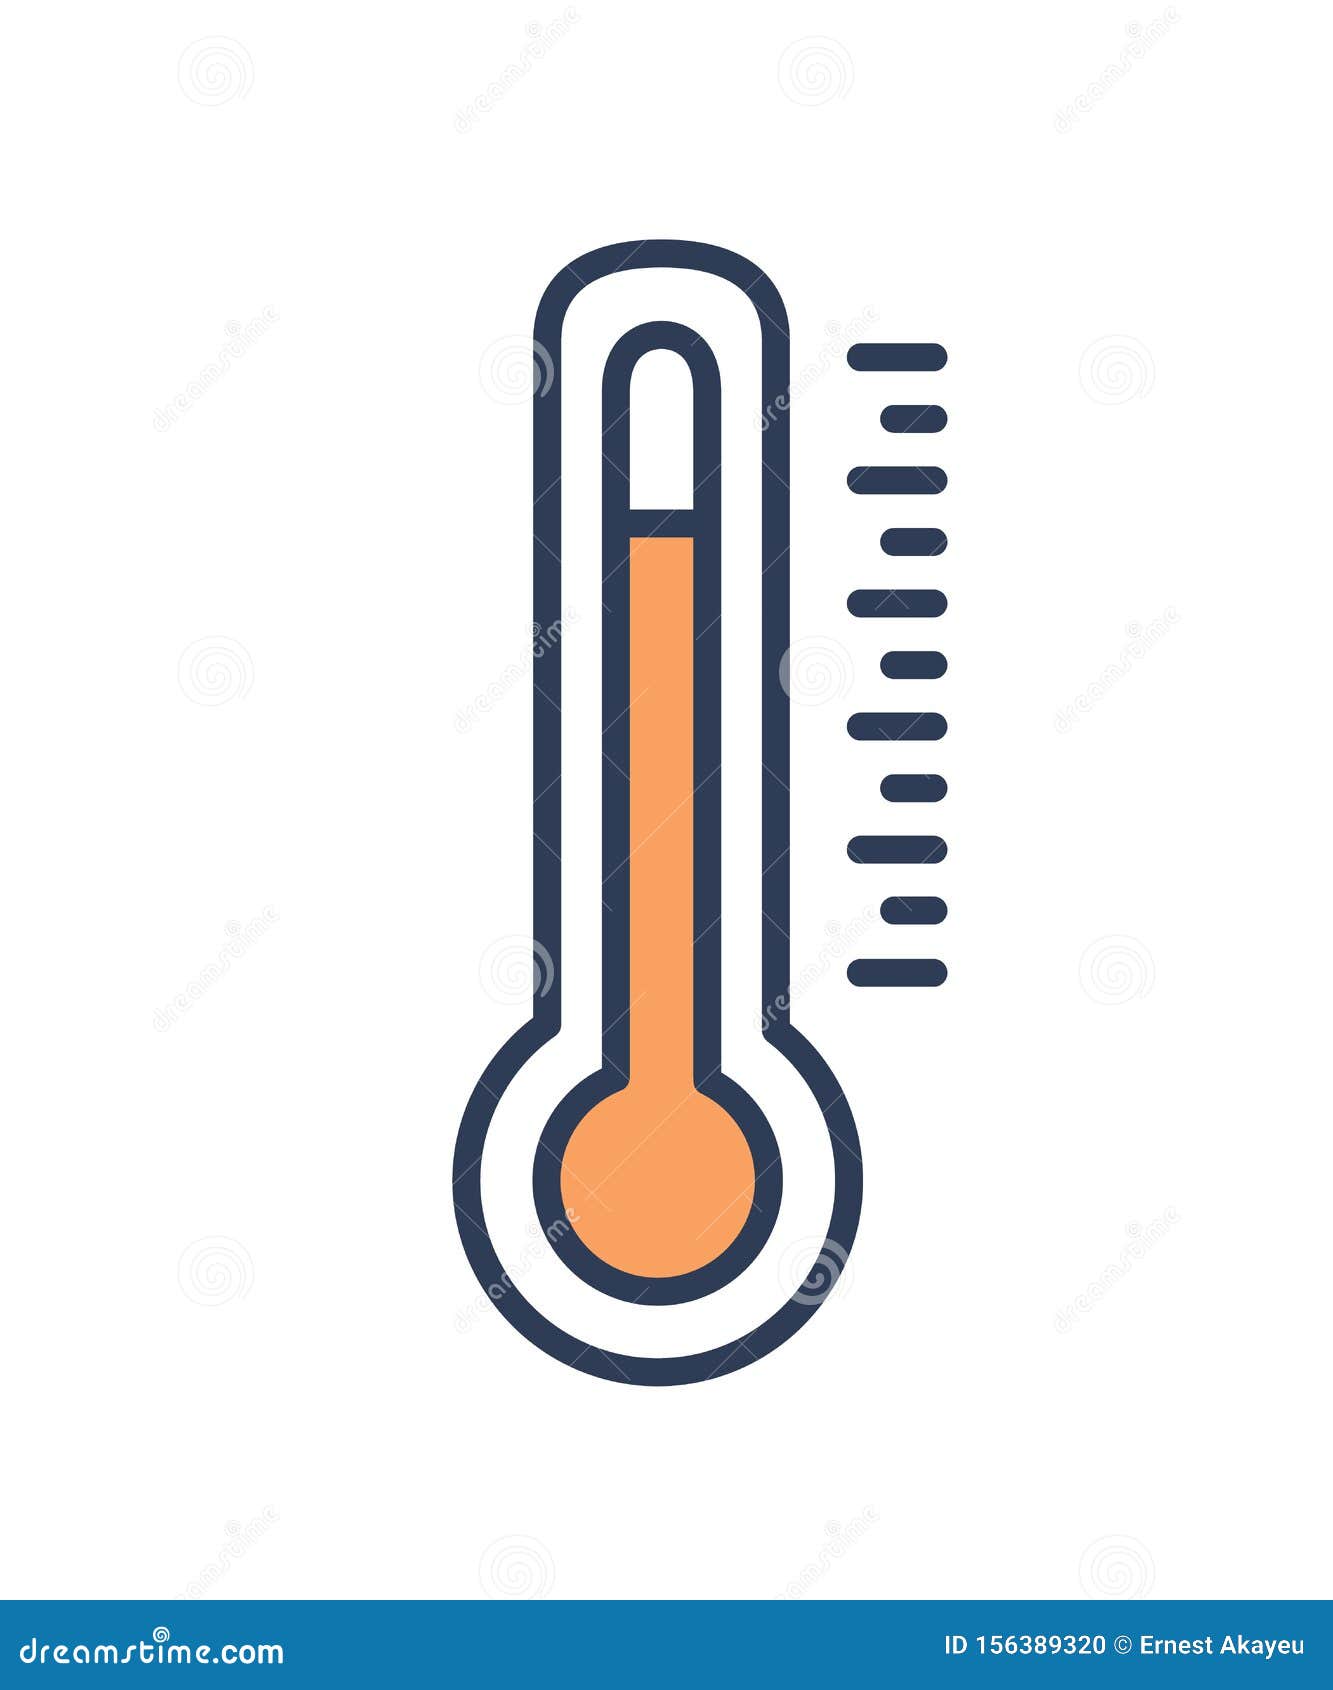 mercury-in-glass or mercury thermometer  on white background. measurement tool, meteorological equipment for